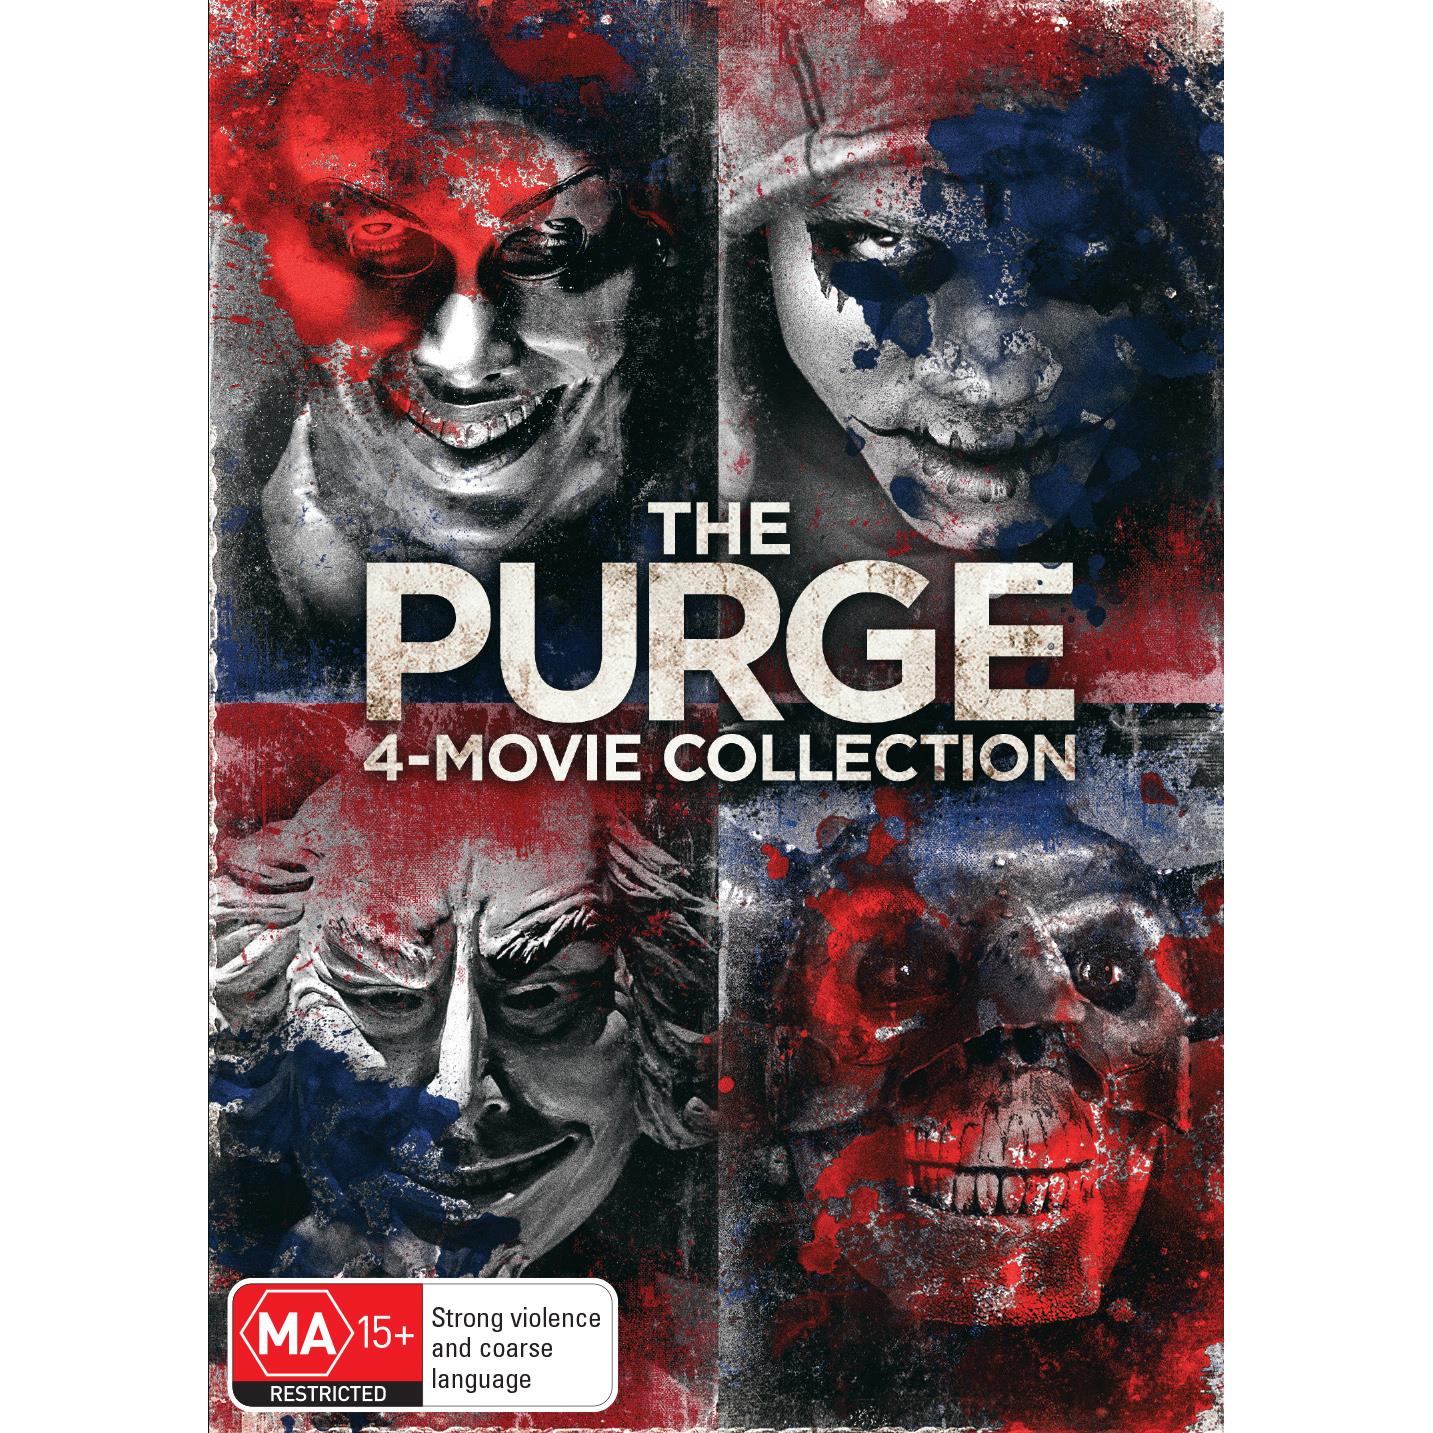 Https Www Jbhifi Com Au Products First Purge The 2018 Dvd 2020 10 28t18 45 05 11 00 Daily Https Cdn Shopify Com S Files 1 0024 9803 5810 Products 335828 Product 0 I 6d257b7b 8b14 4507 920a D2122fcfe048 Jpg V 1572321569 First Purge The - kate the chaser model for horror games roblox